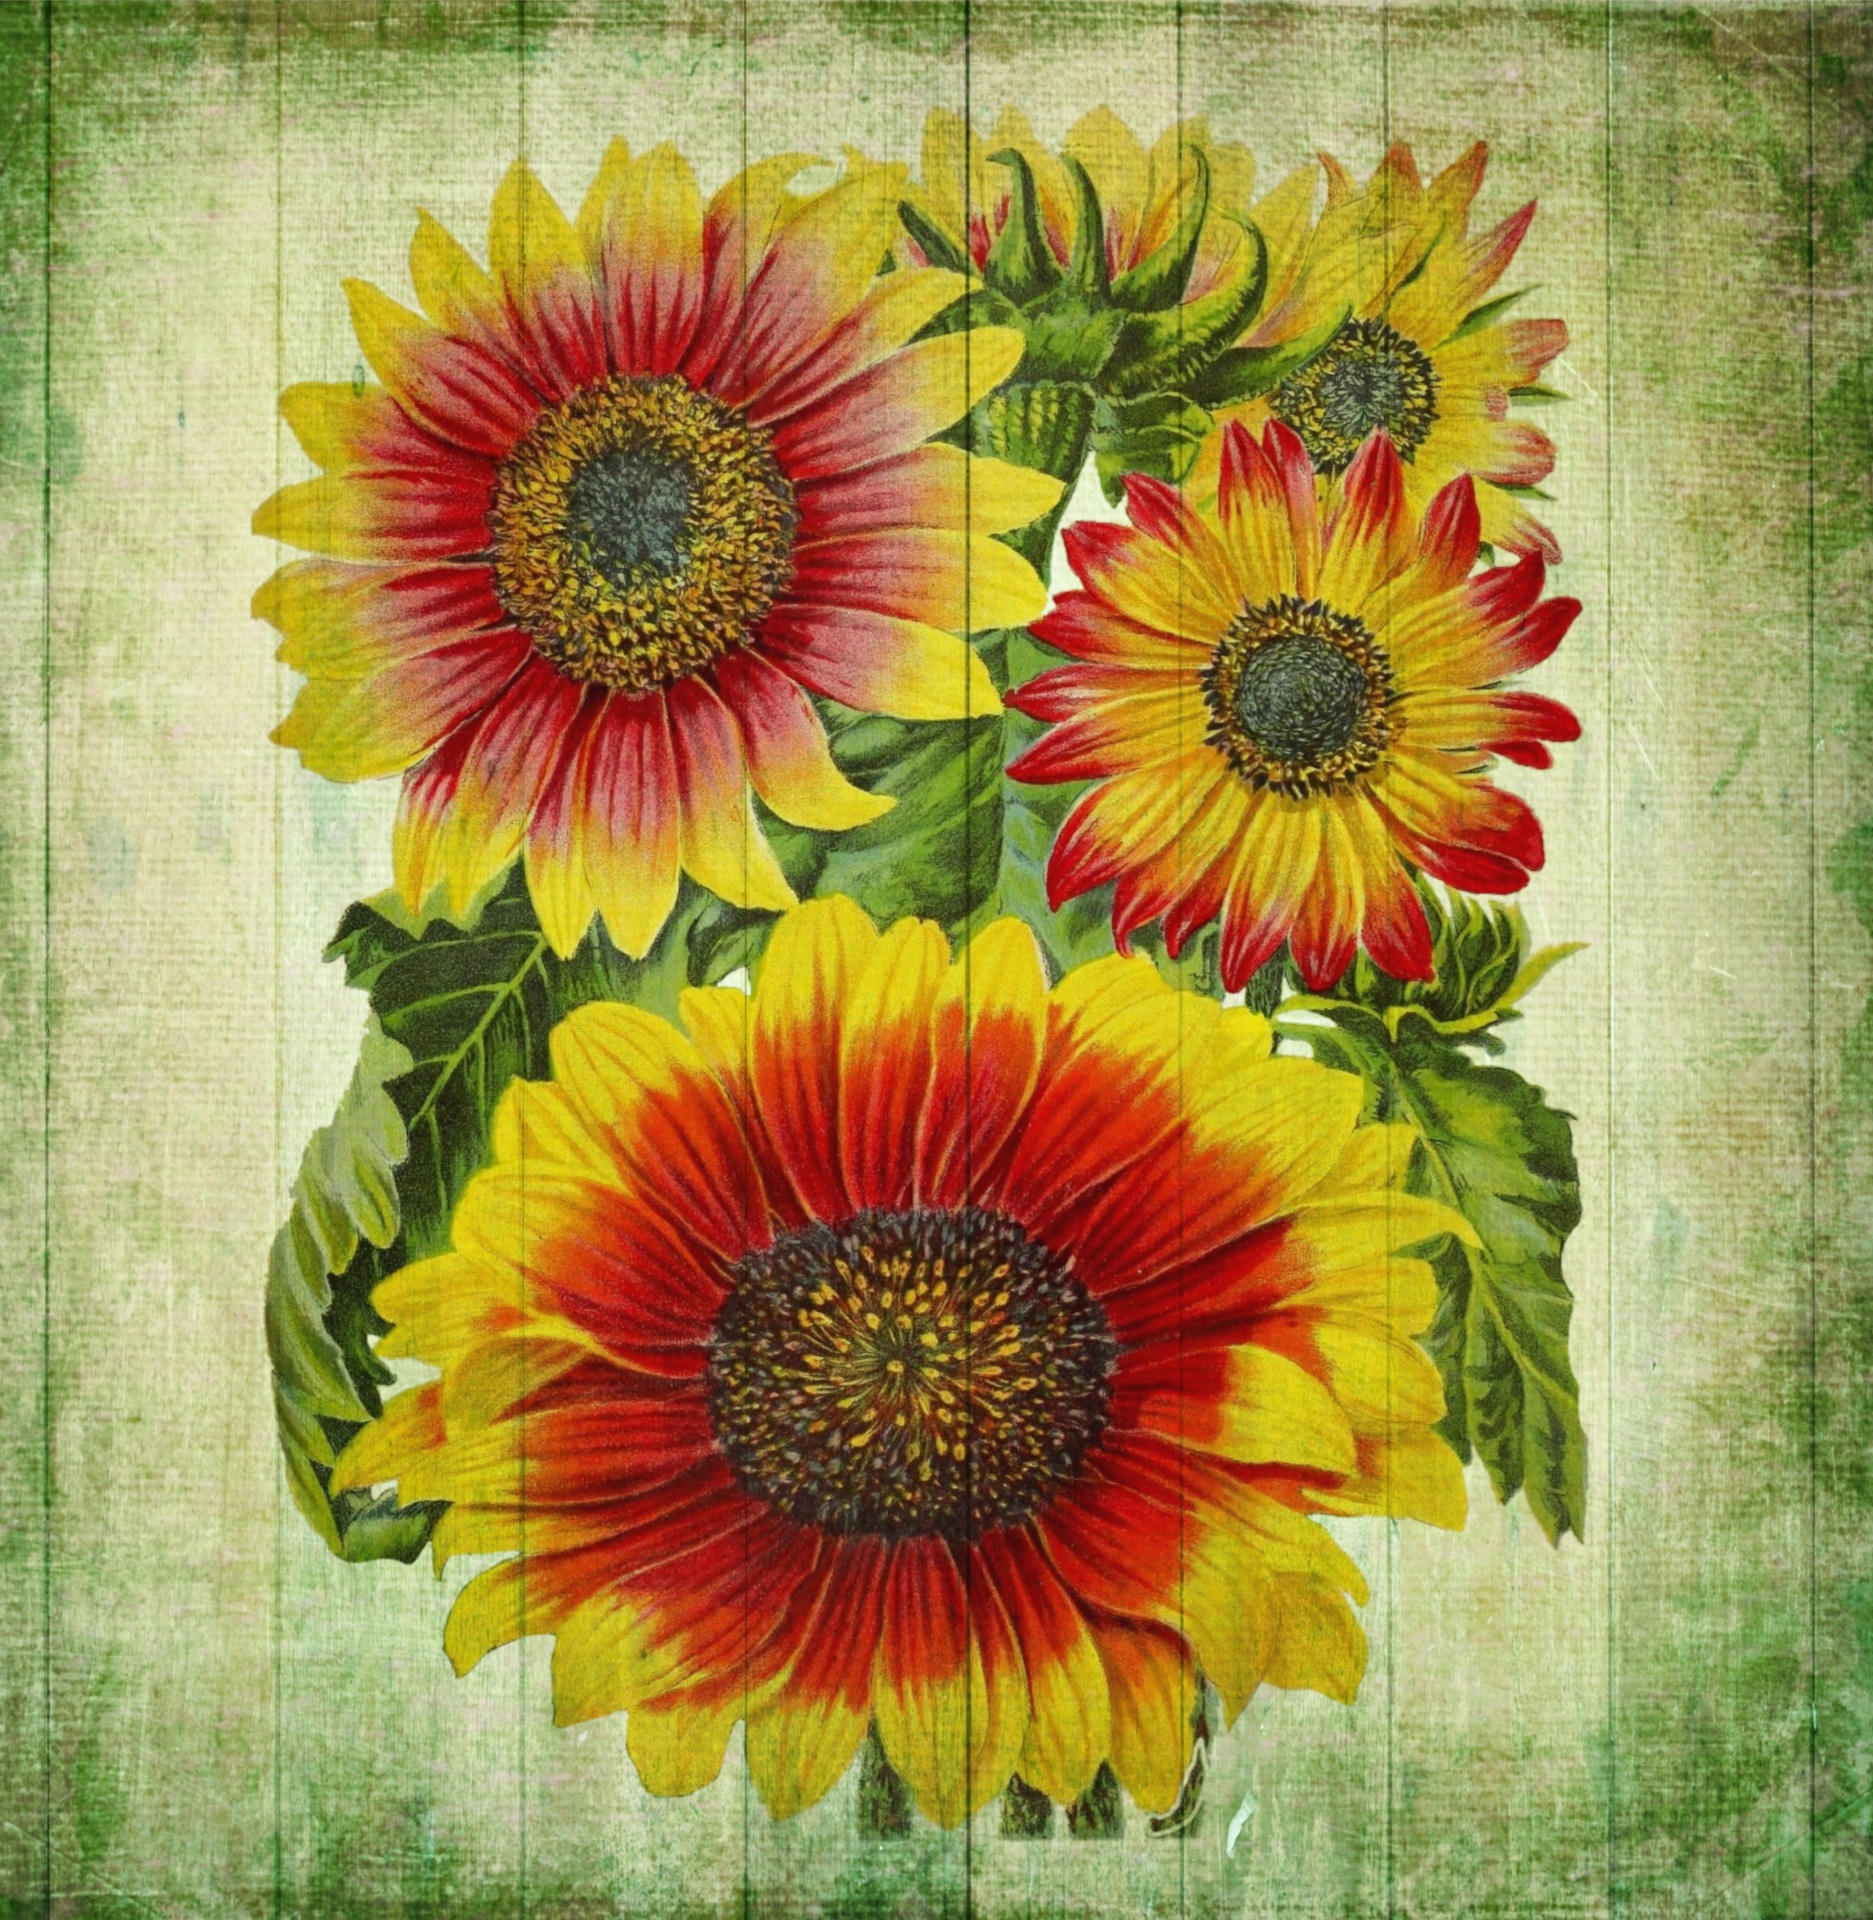 Vintage art collage flower sunflowers with red yellow petals on green canvas with fern foliage ornament art print poster